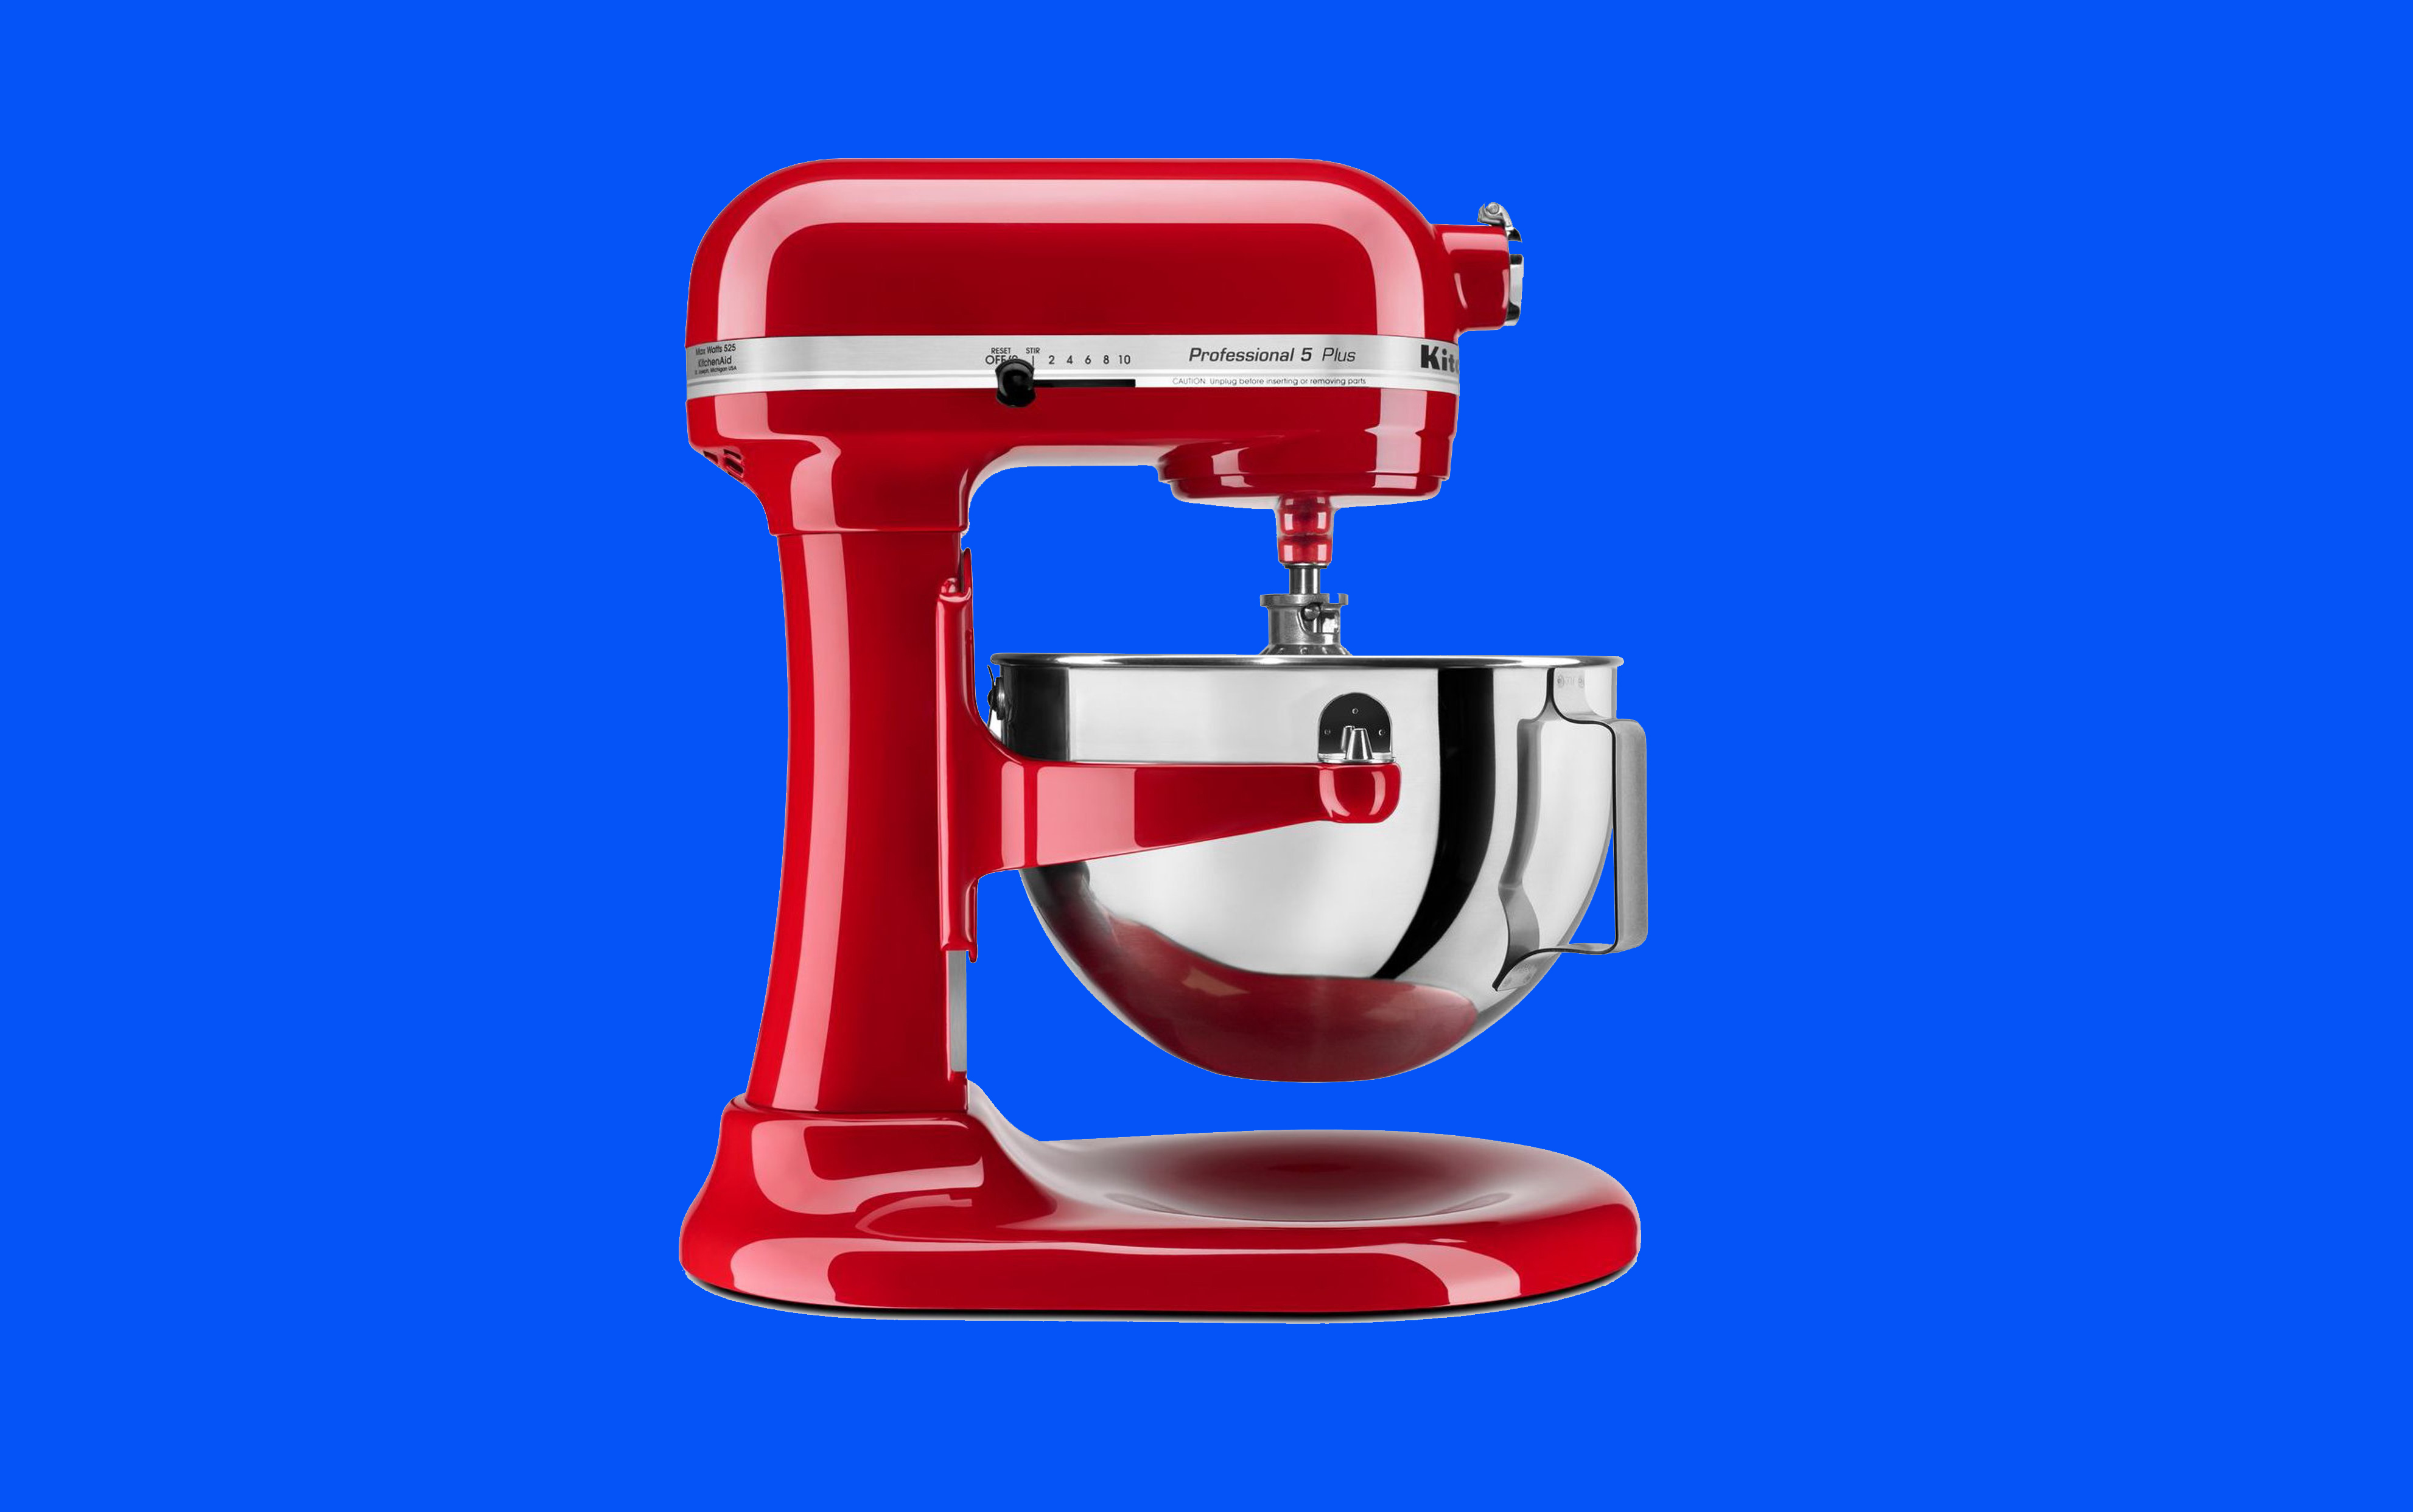 Target's Current KitchenAid Sale Will Save You Nearly $100